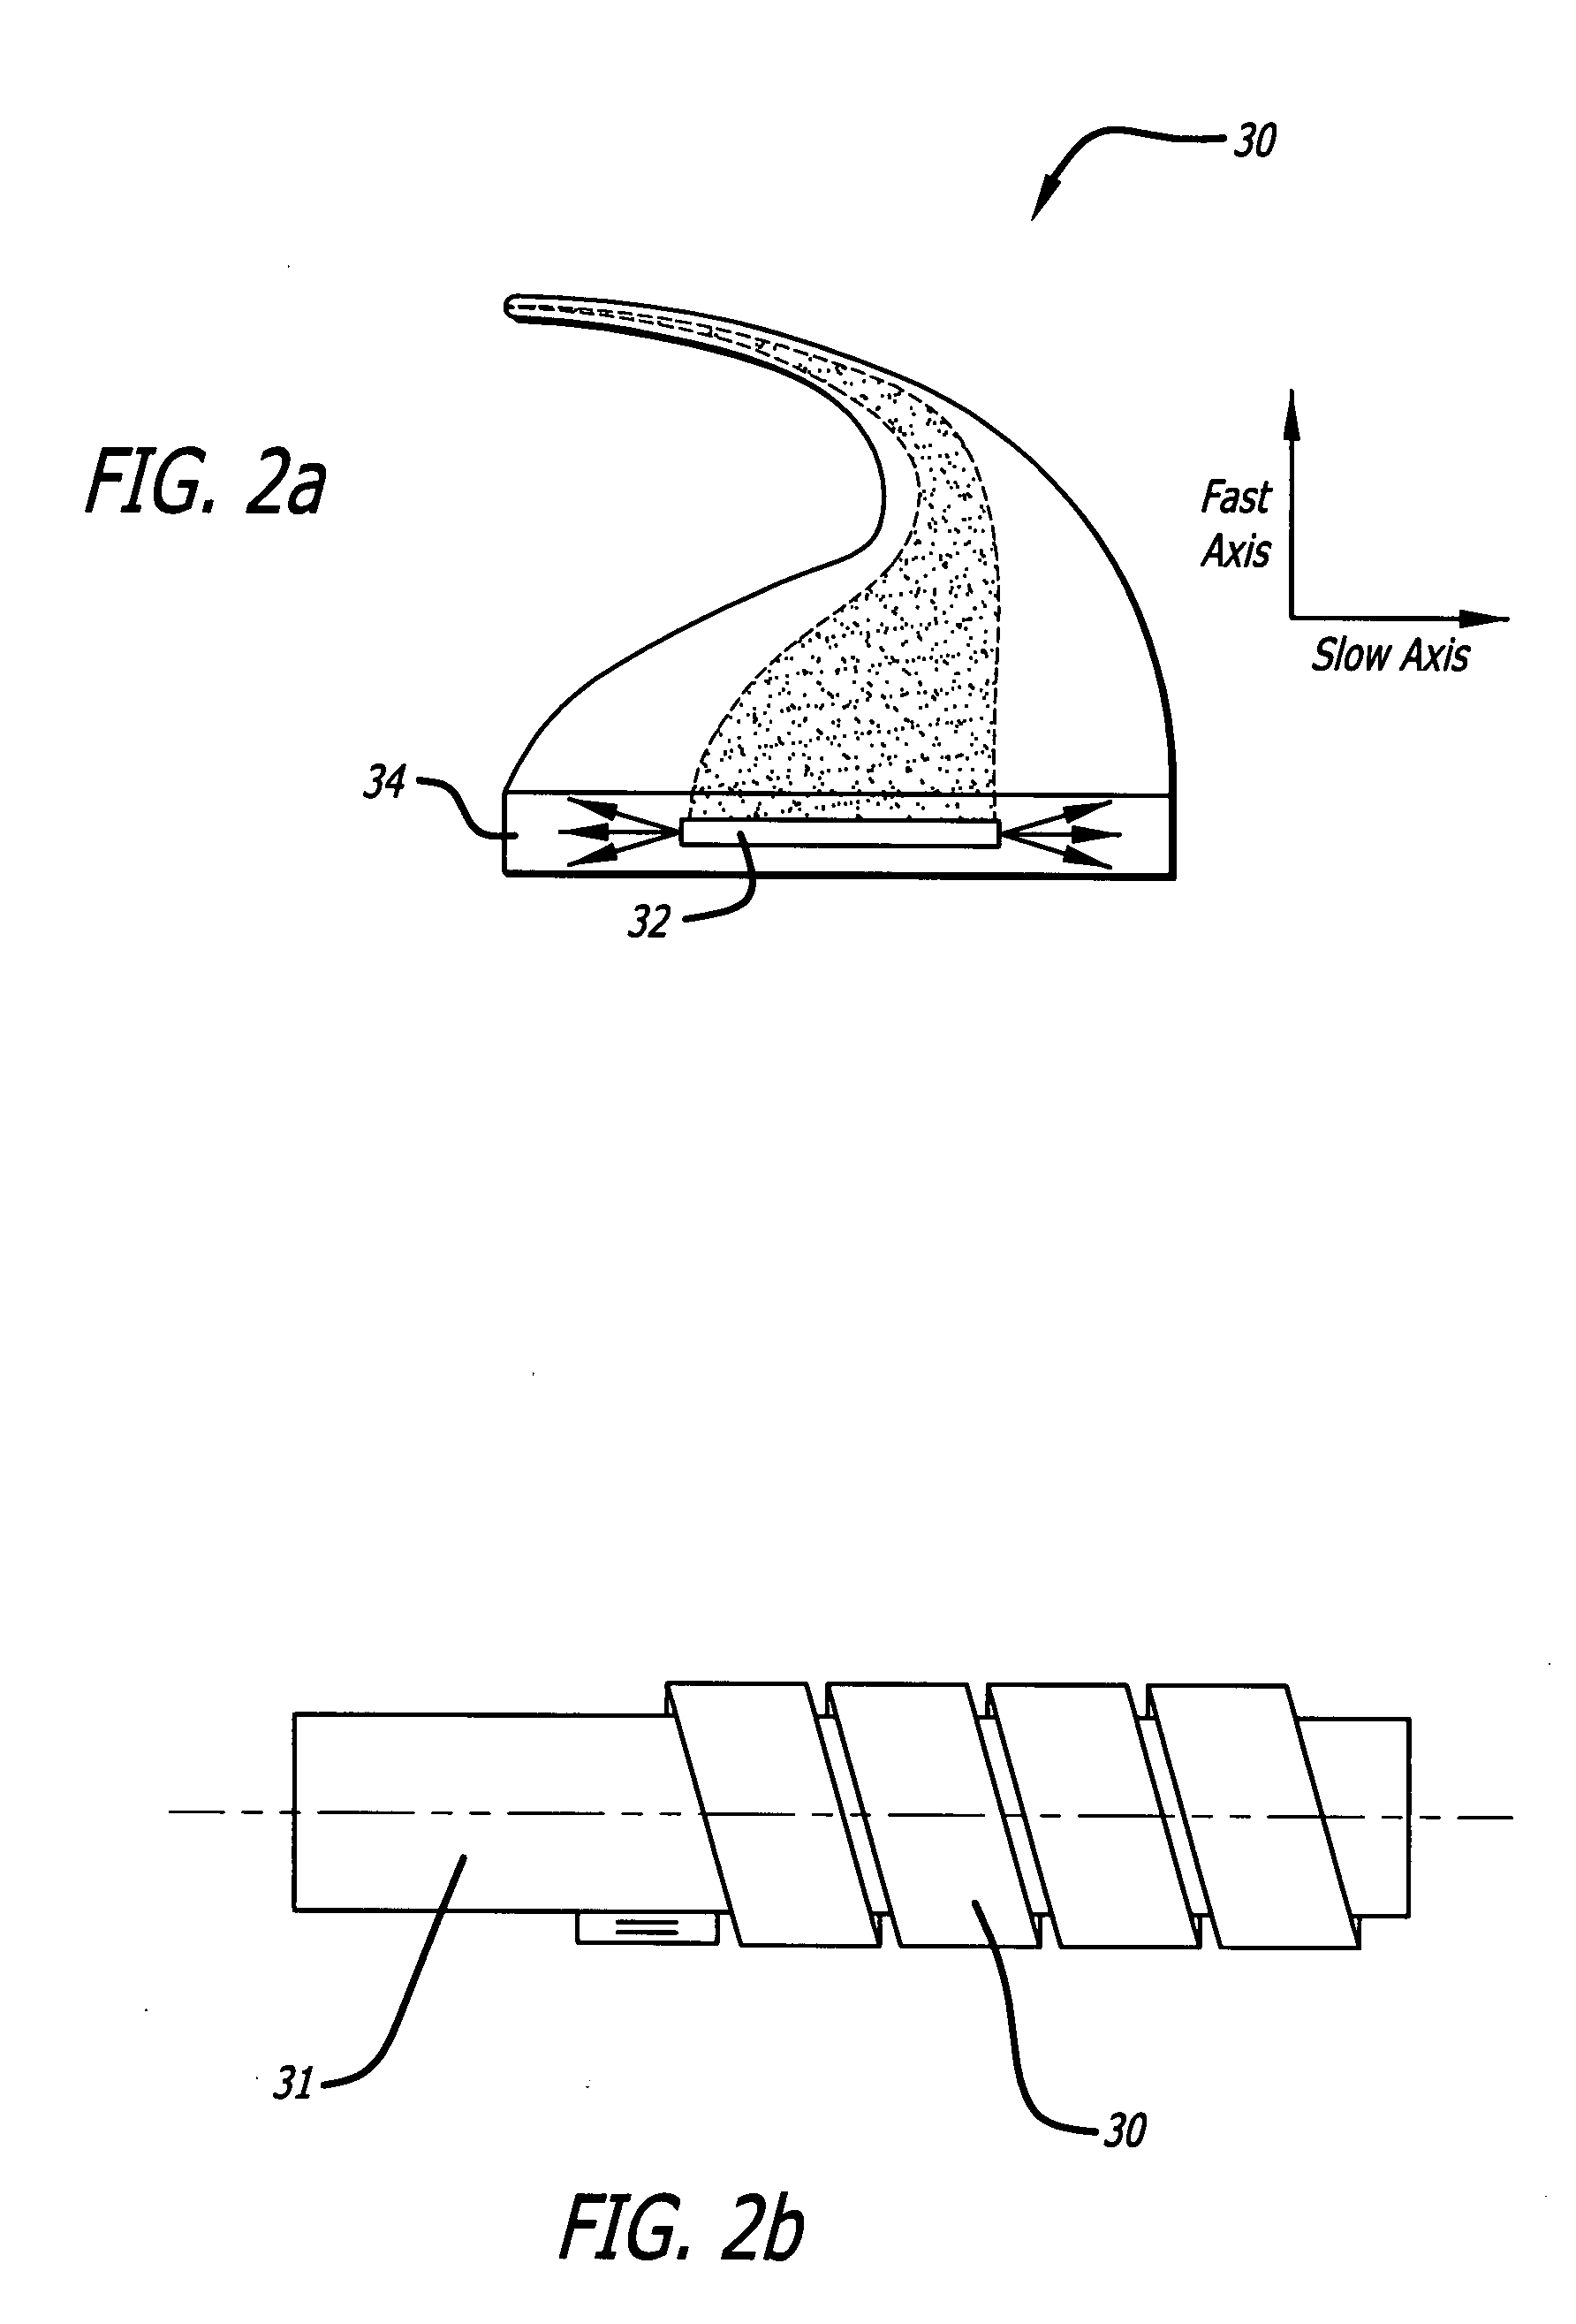 Method and apparatus for generation and amplification of light in a semi-guiding high aspect ratio core fiber